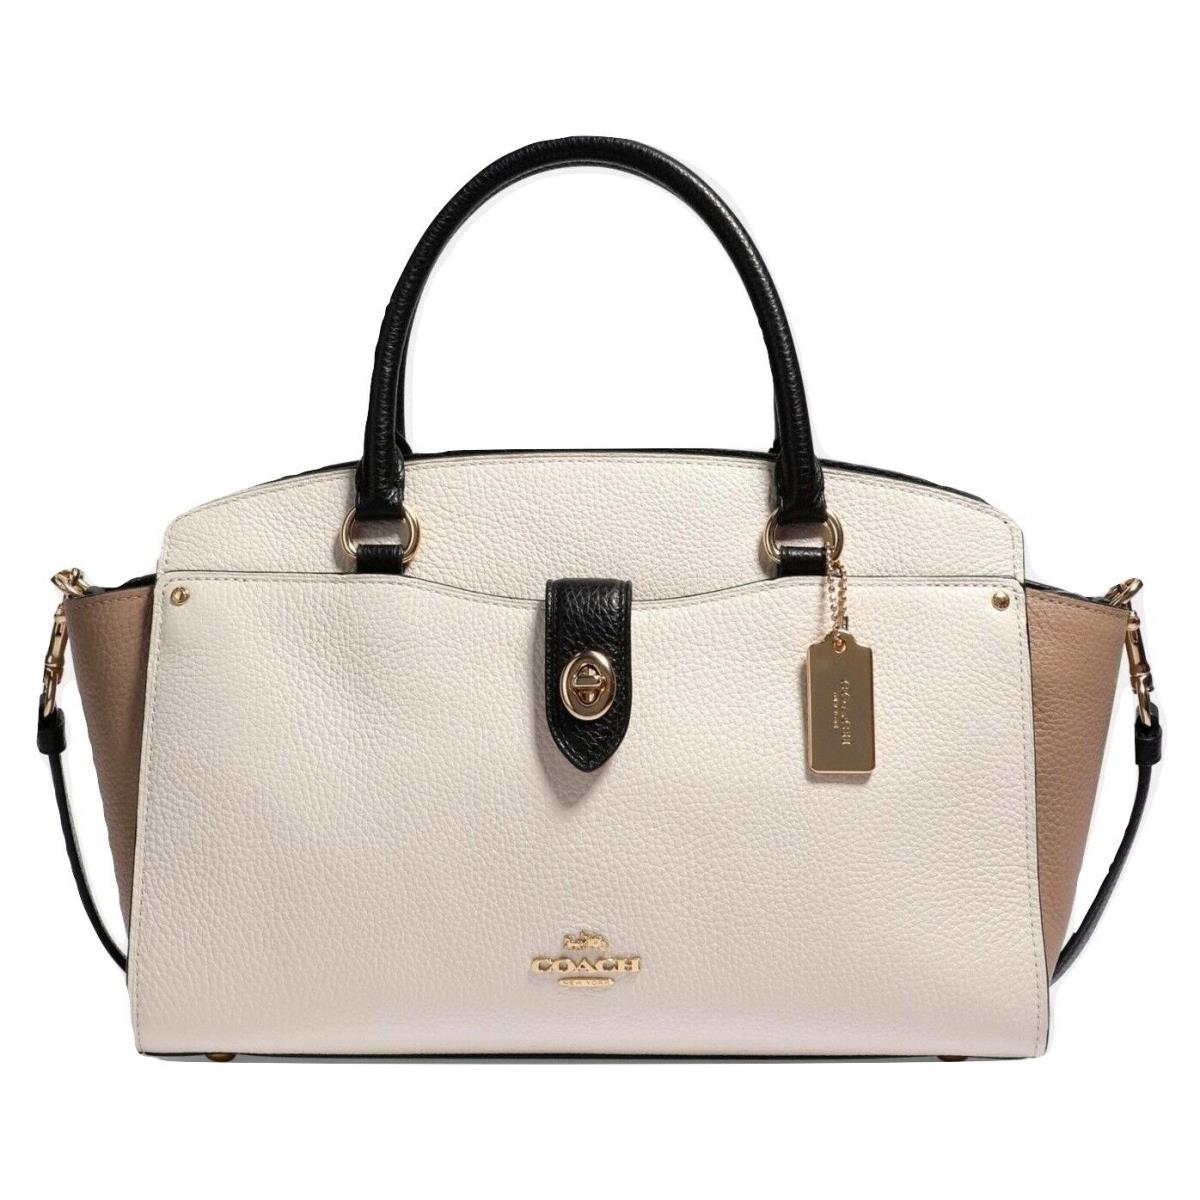 Coach Brie Carryall Bag In Colorblock Im/chalk Multi Msrp: